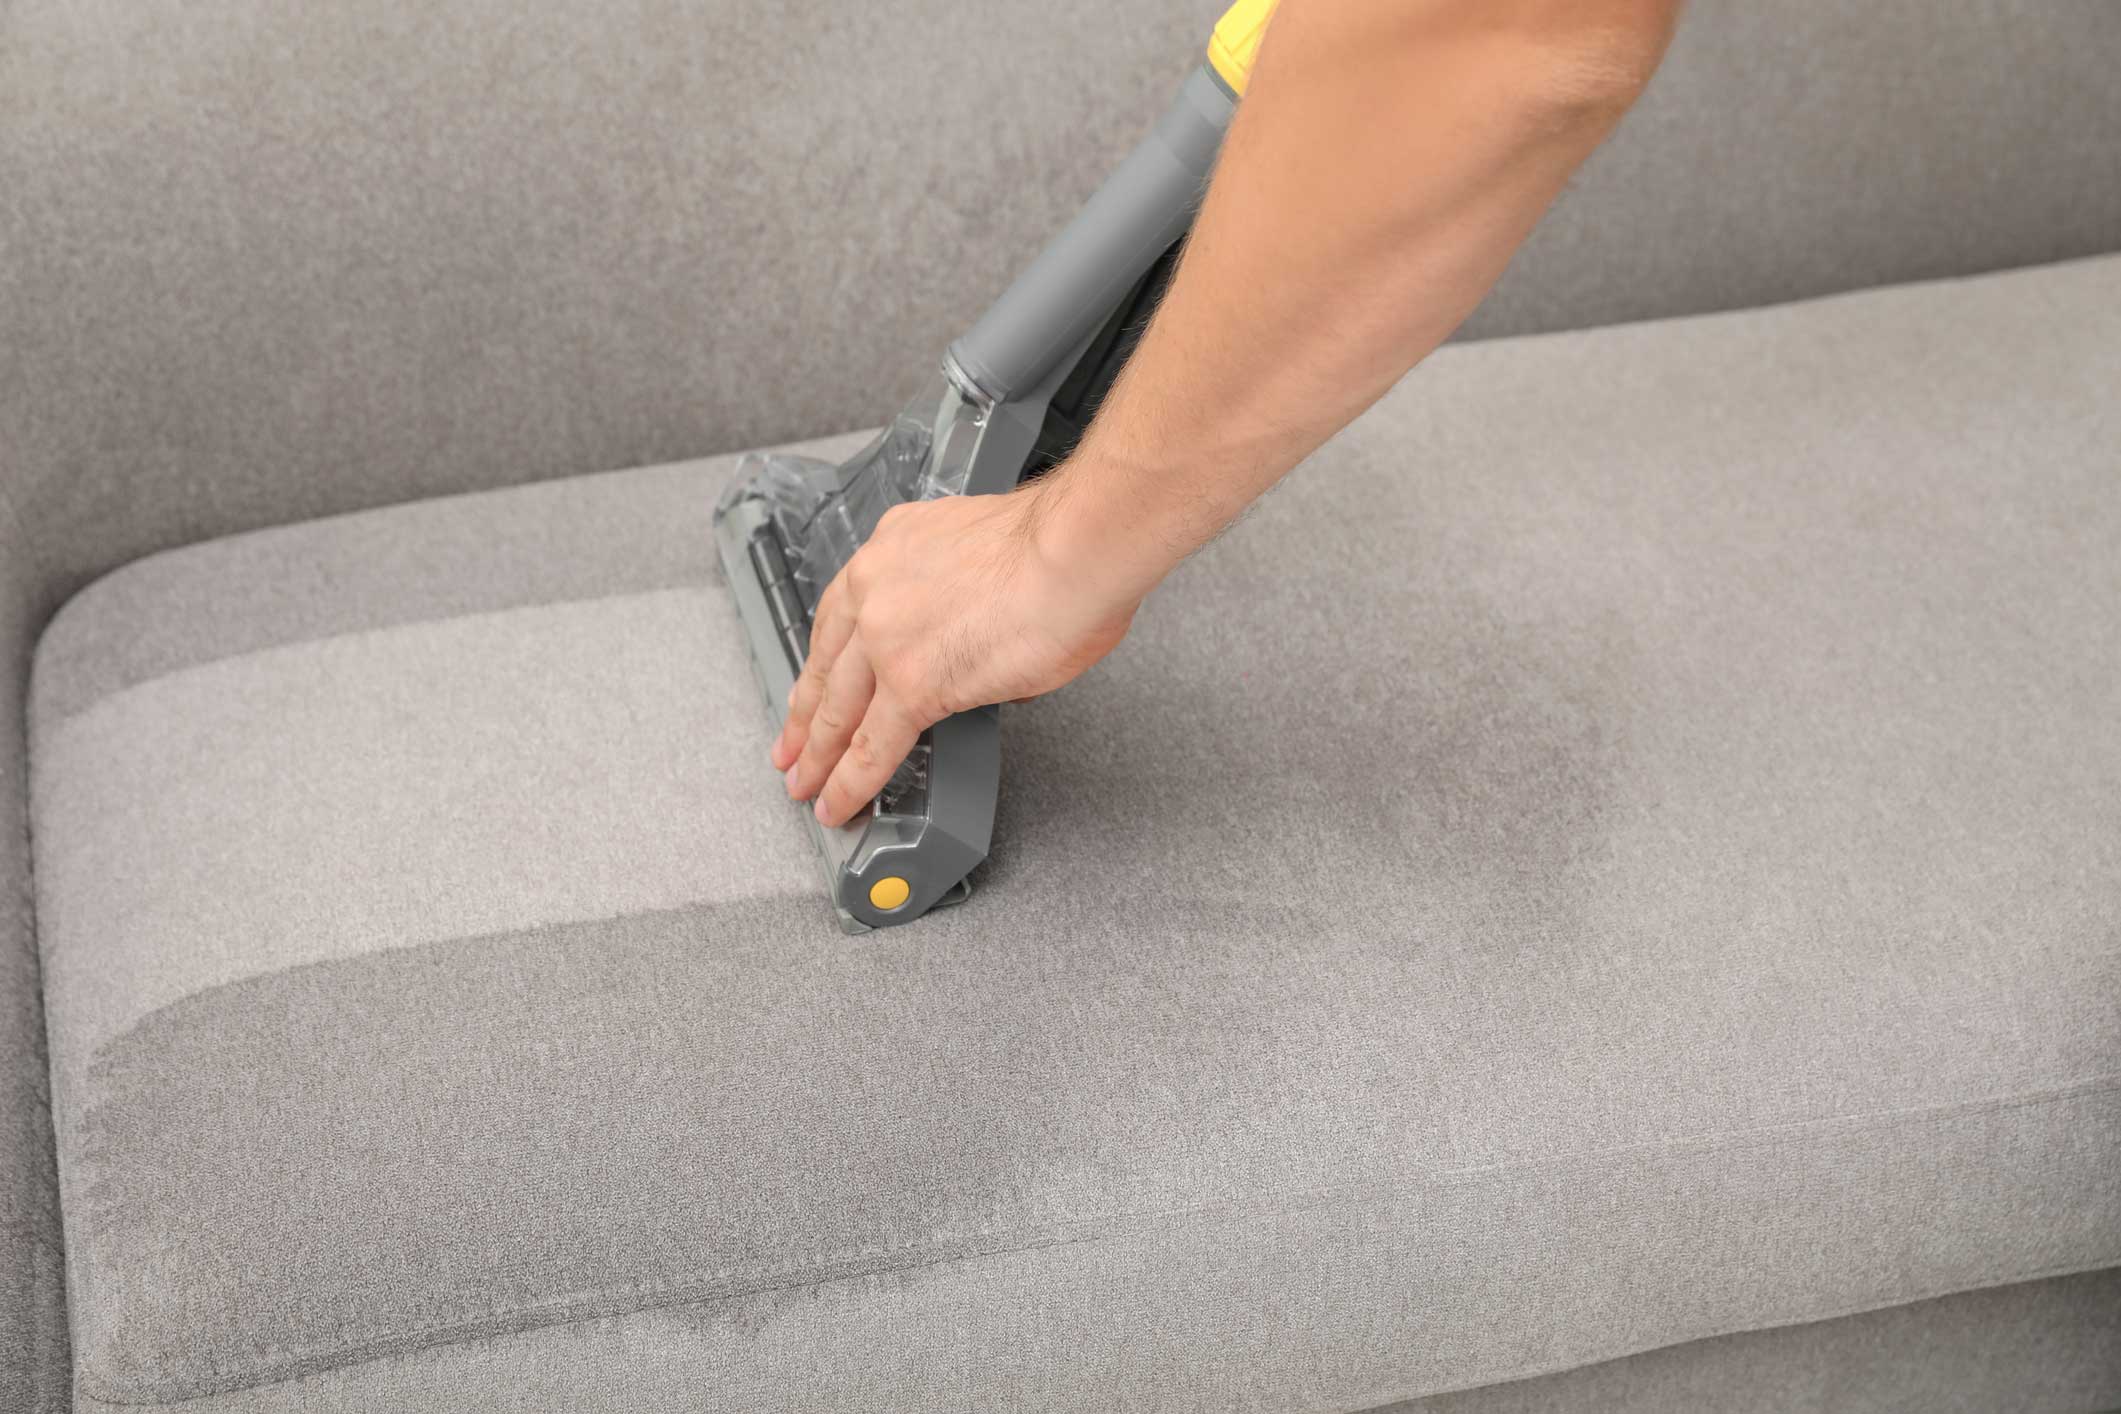 Sofa-cleaning